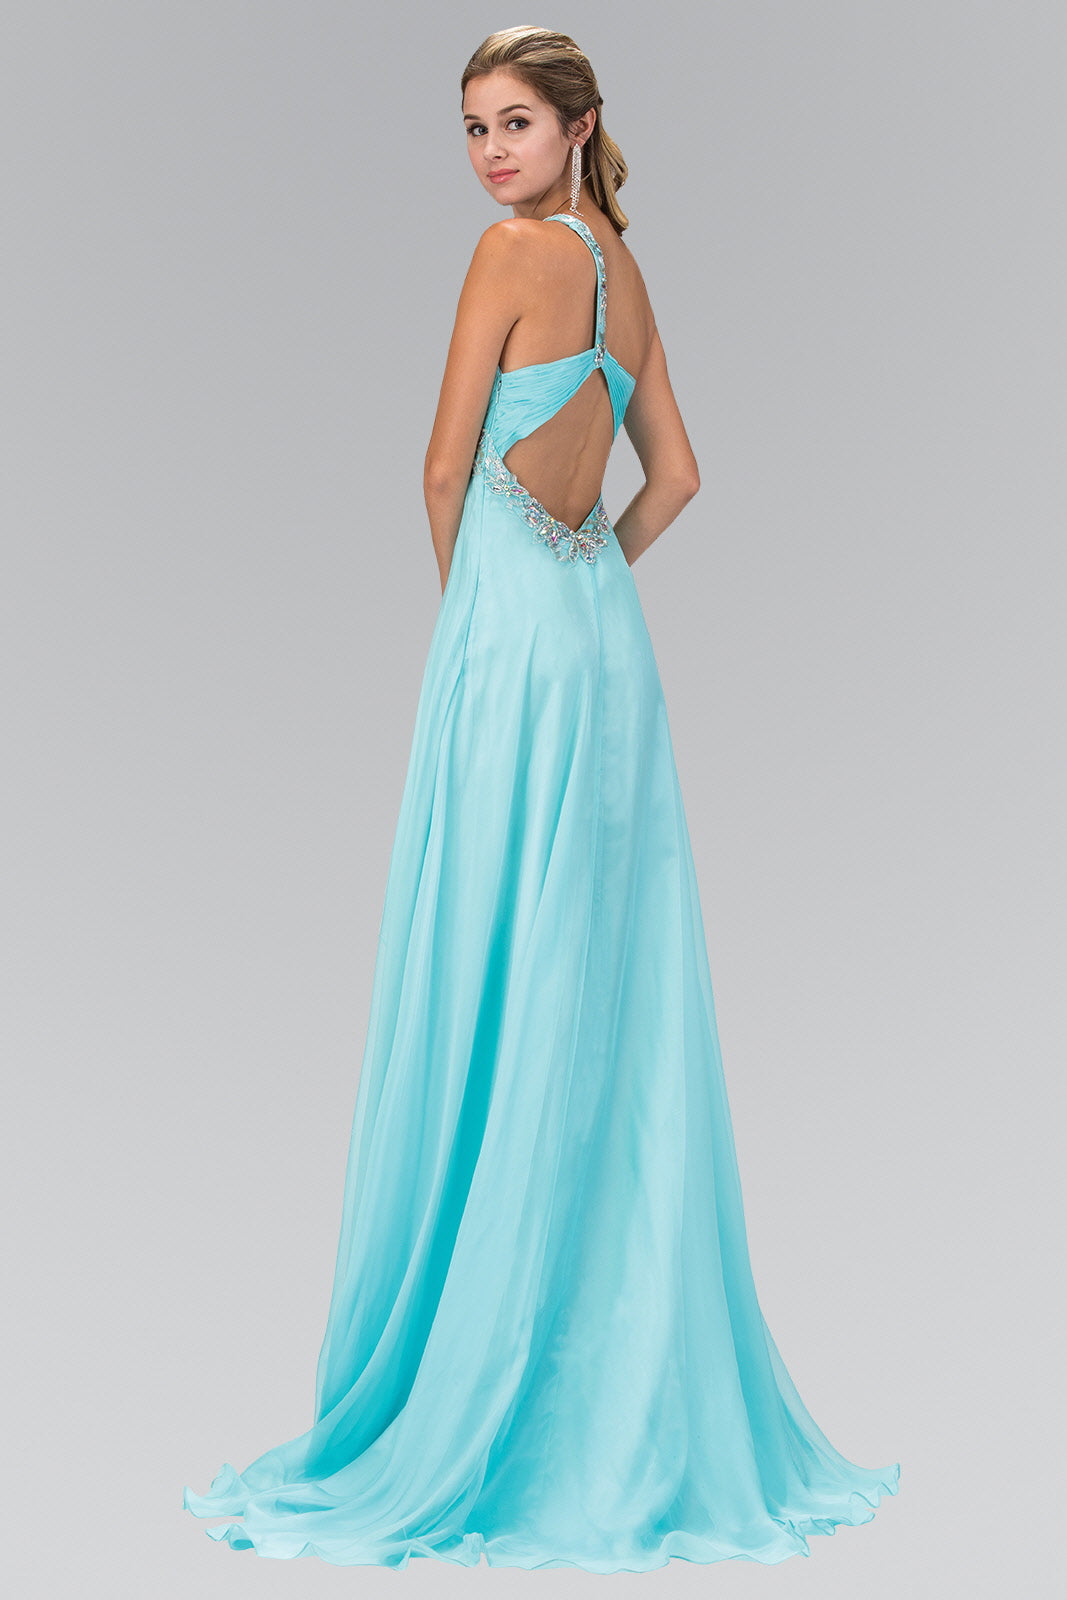 One Shoulder Chiffon Long Dress Accented with Jewel-smcdress